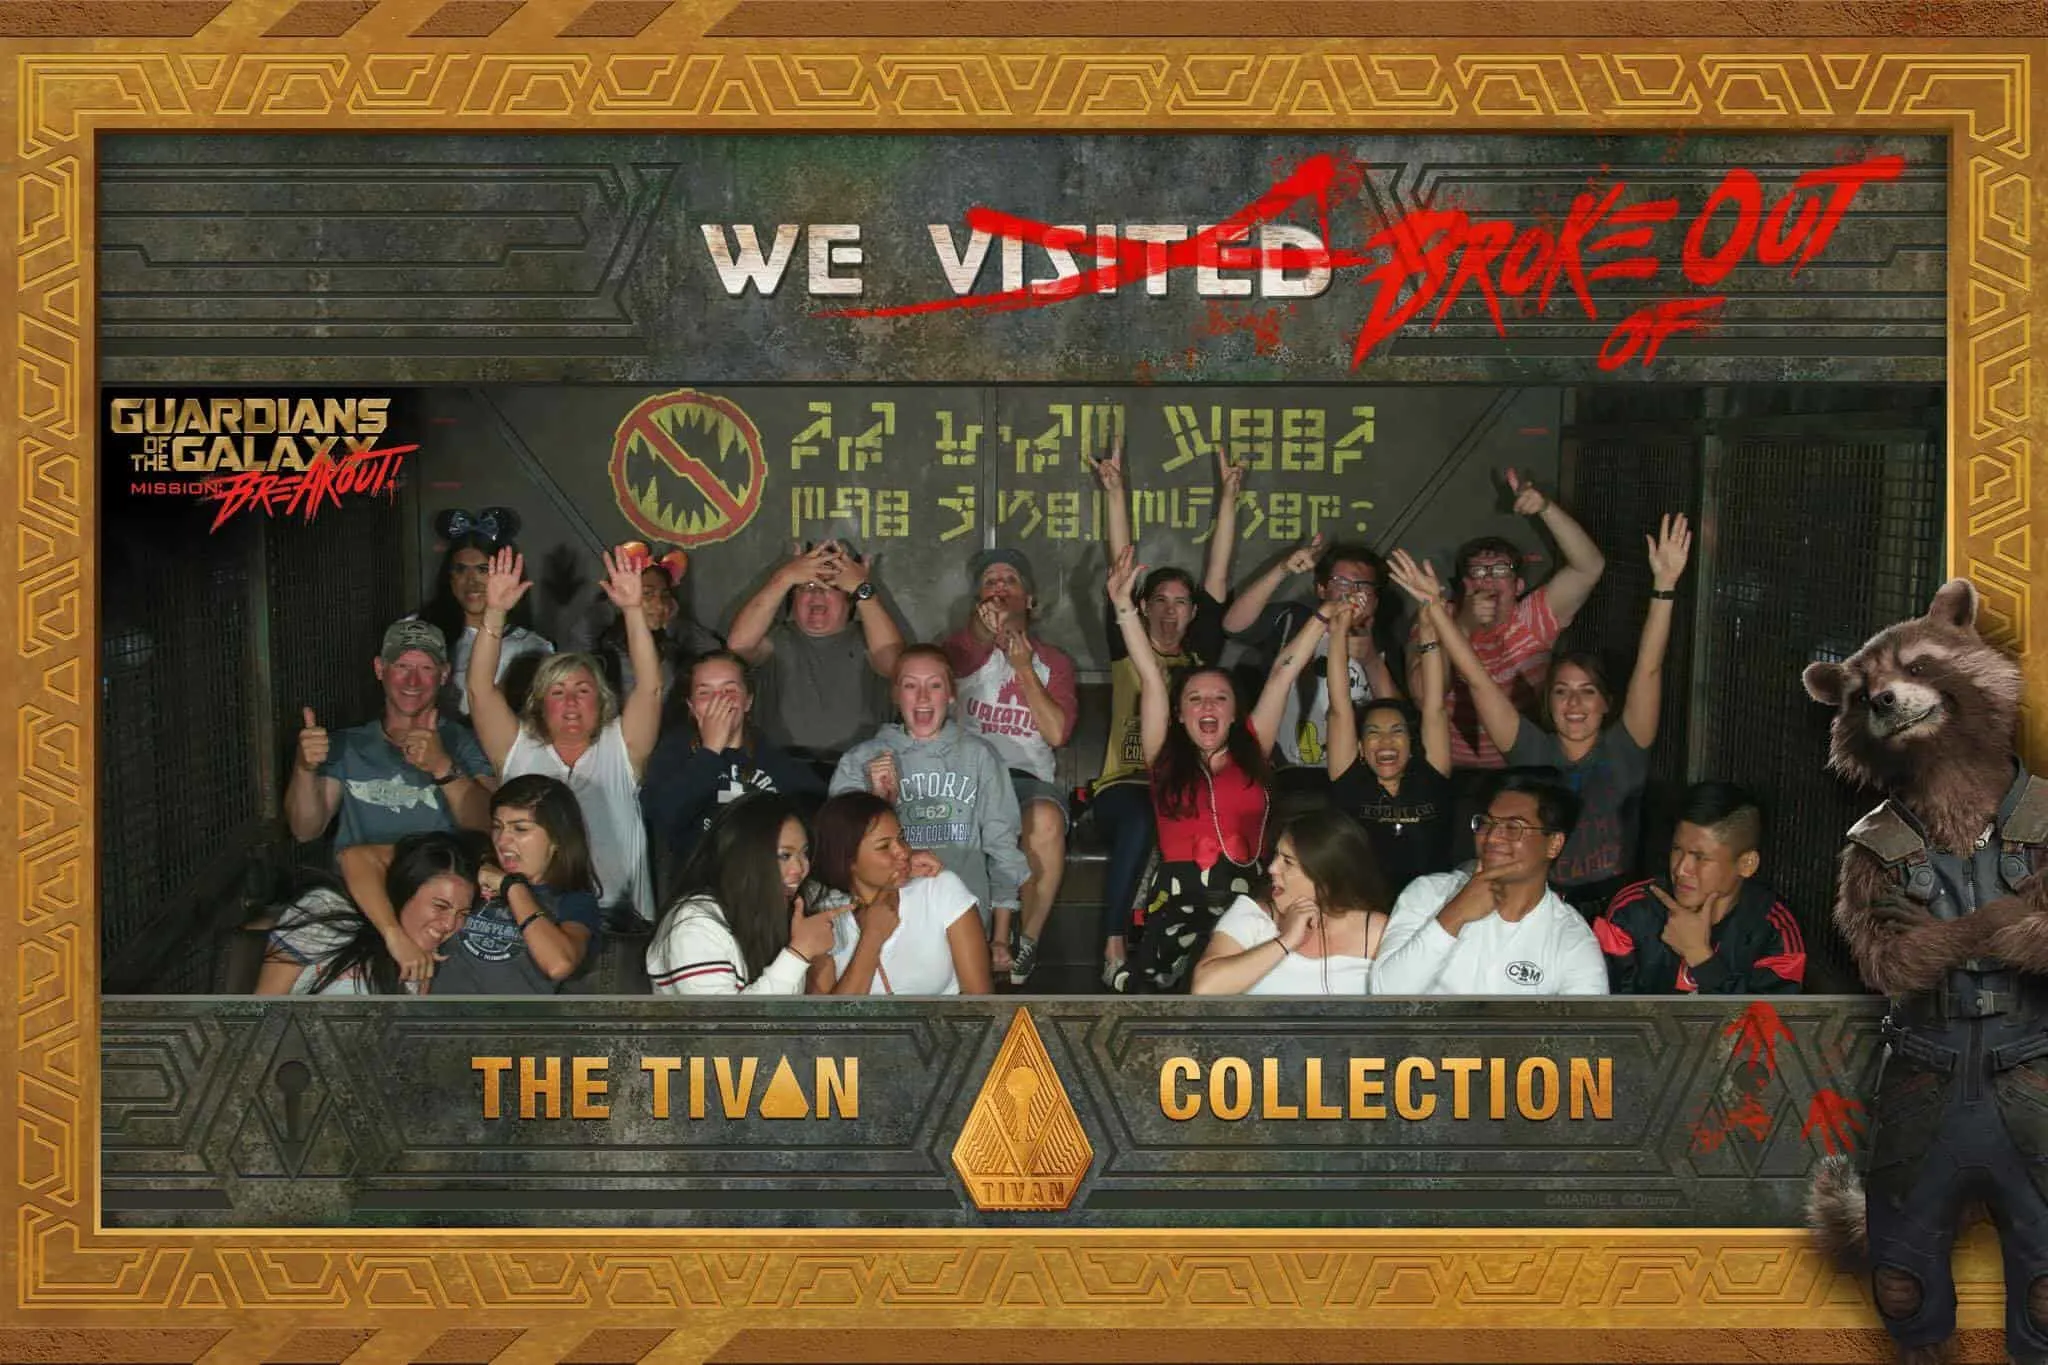 D23 Expo trip to Disneyland - Experiencing Summer Of Heroes - Guardian of the Galaxy - Mission: Breakout!